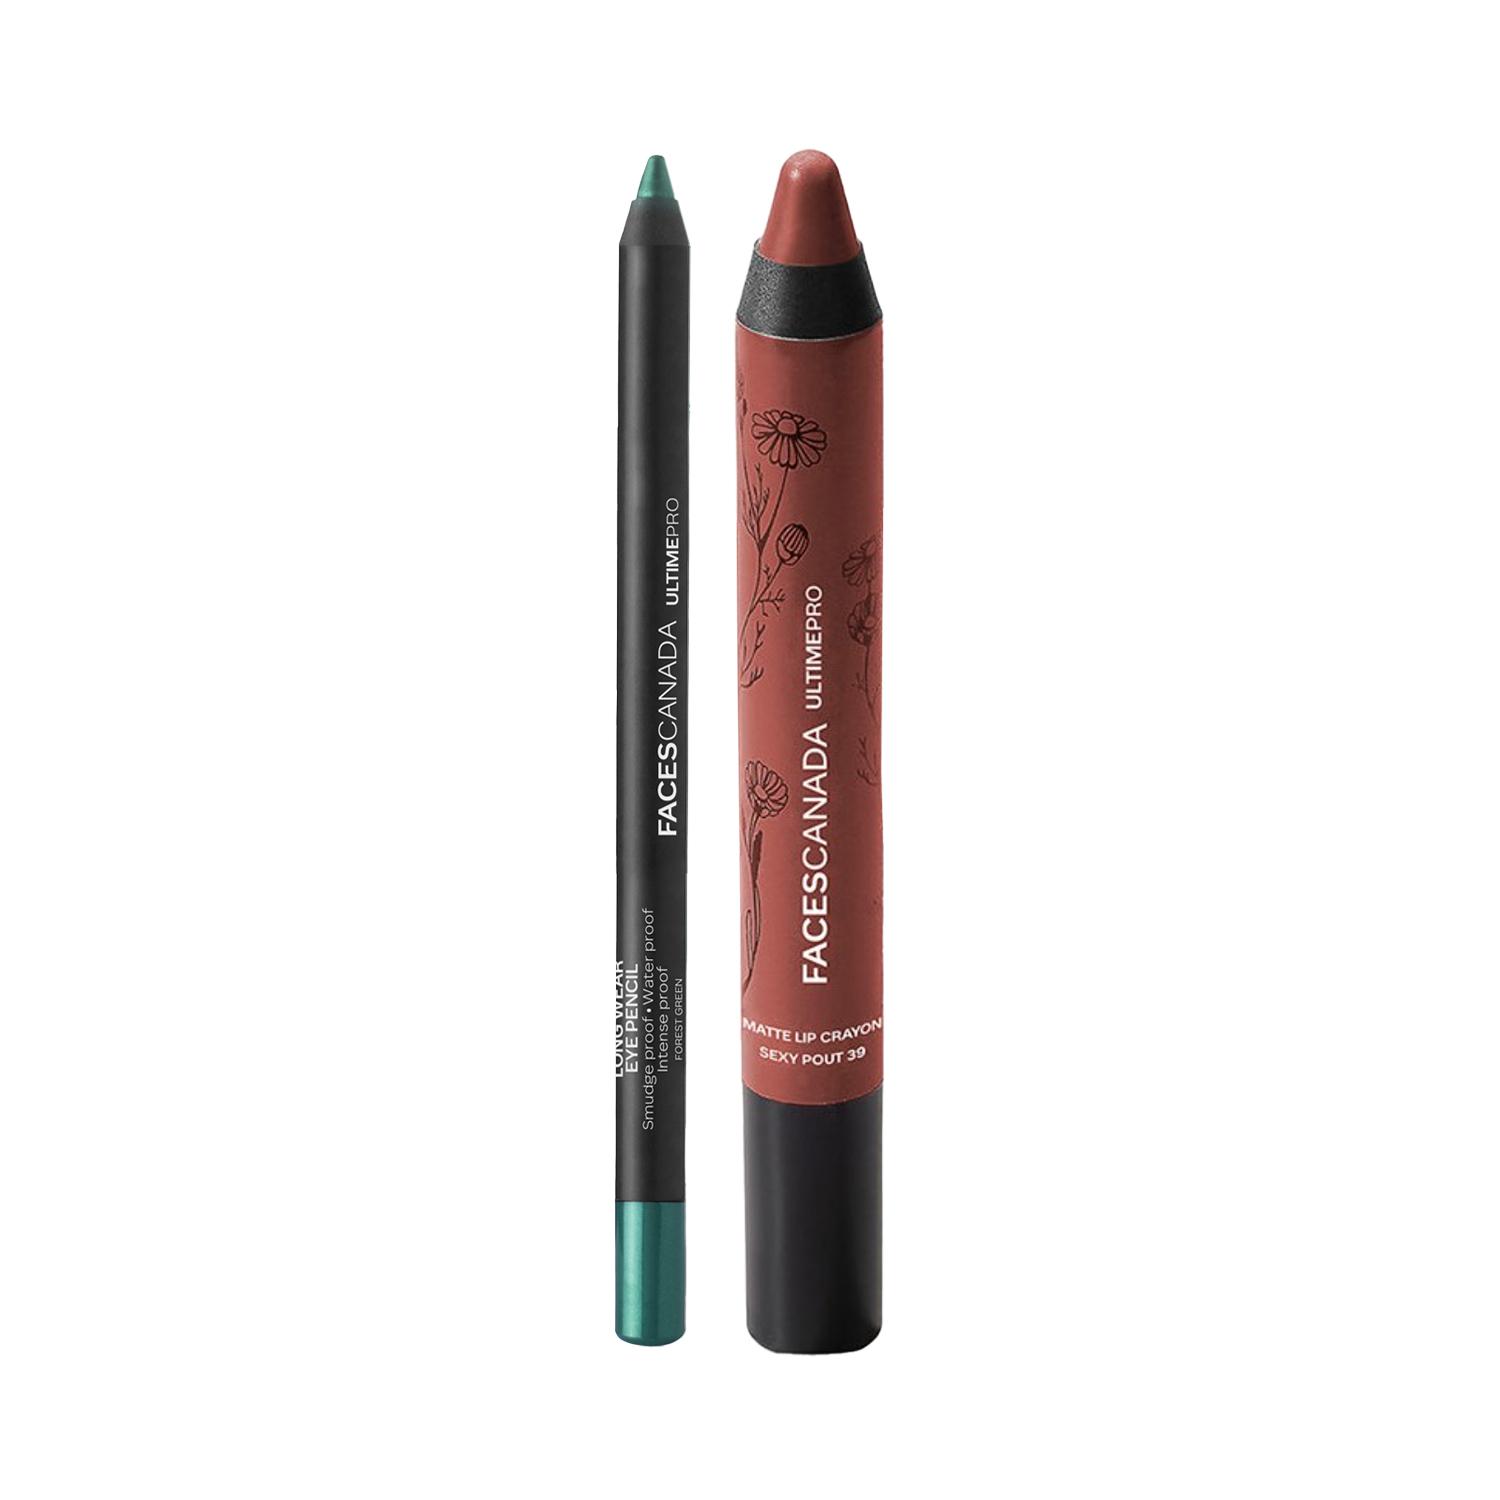 Faces Canada | Faces Canada Matte Lip Crayon - Wrapped Up (2.8g) and Eye Pencil - Forest Green (1.2g) Combo